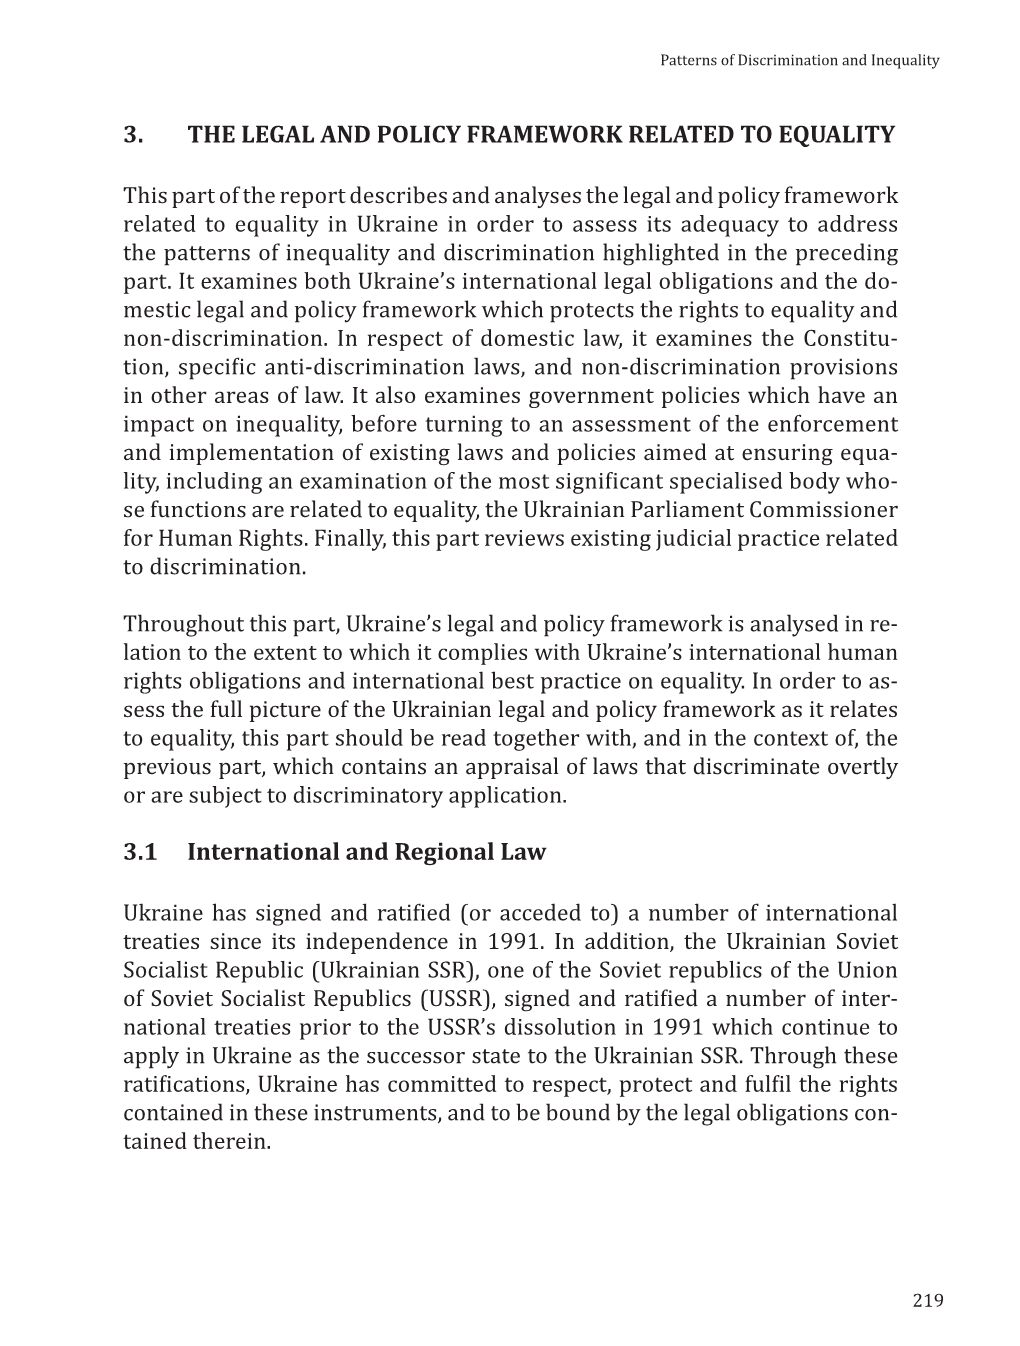 The Legal and Policy Framework Related to Equality